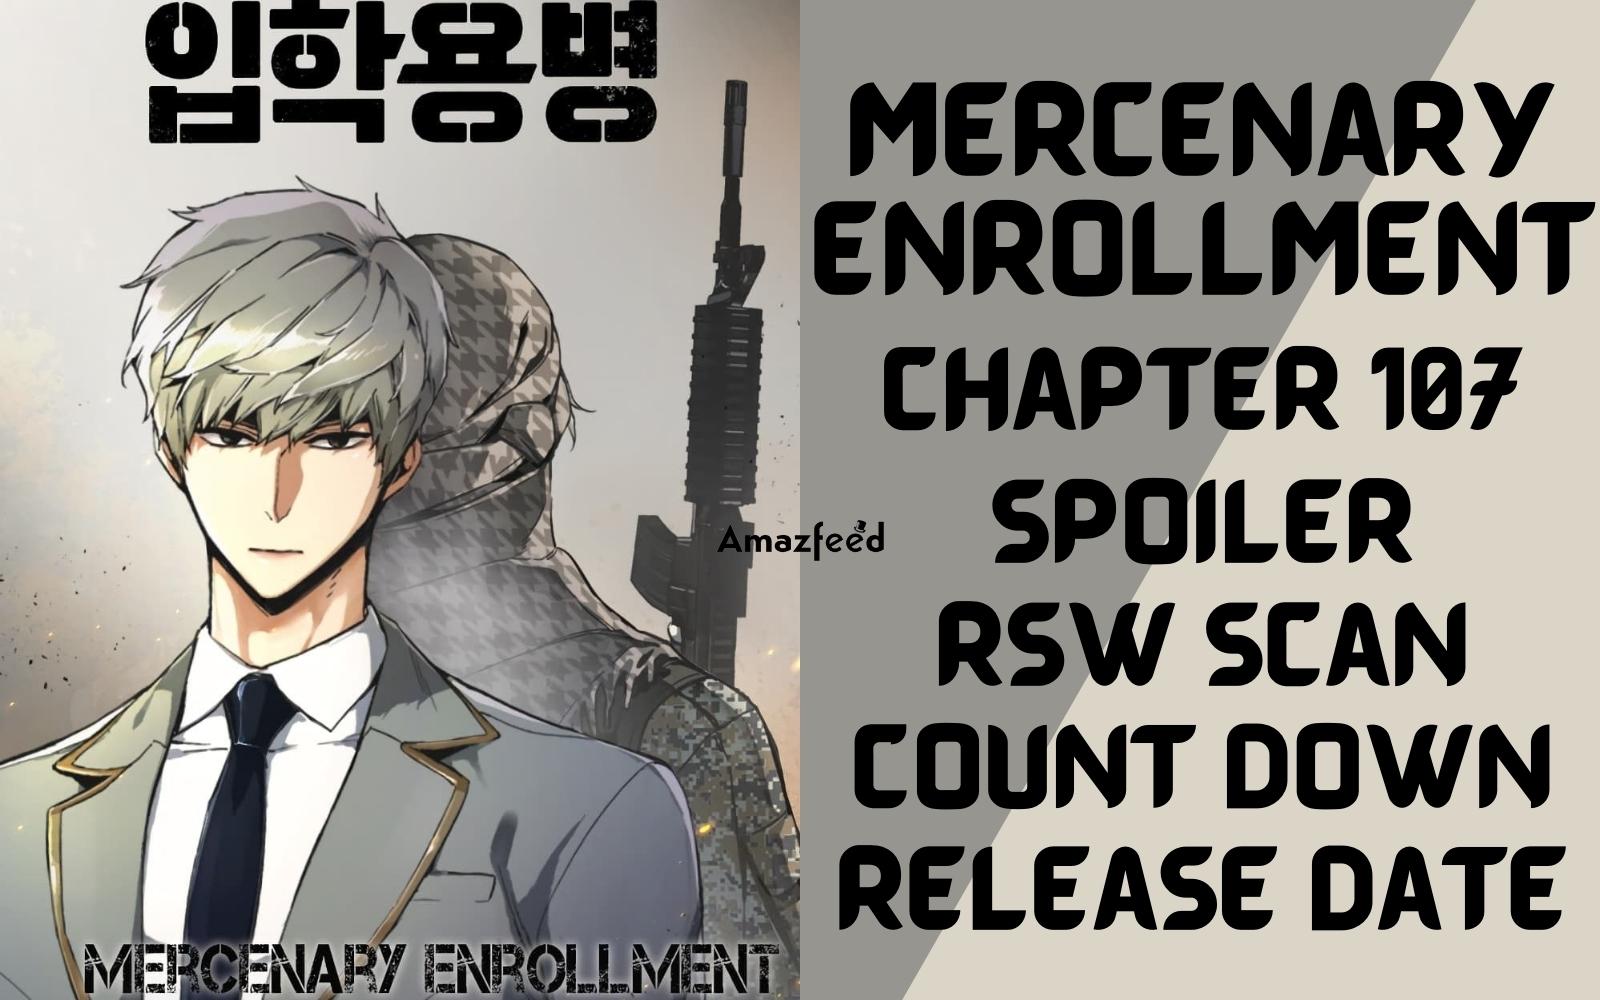 Mercenary Enrollment Chapter 107 Spoiler, Countdown, About, Synopsis, Release Date